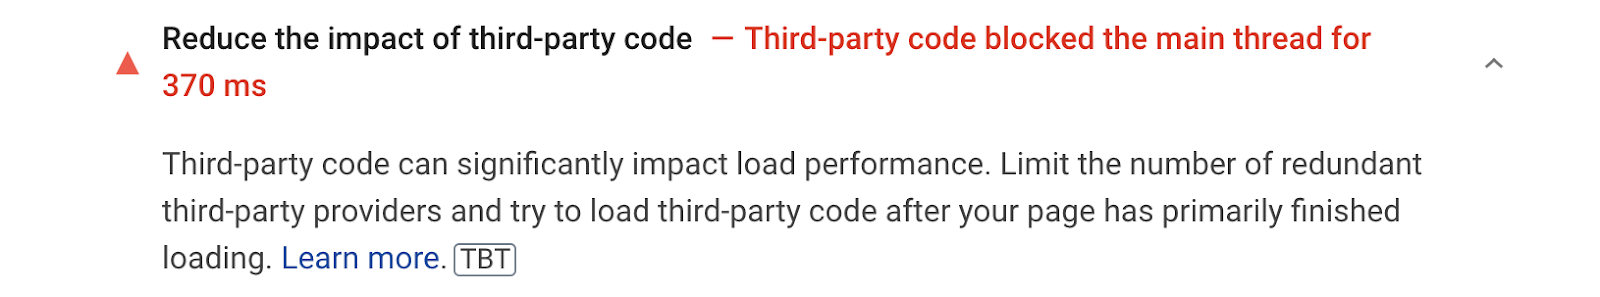 how to reduce impact of third party code